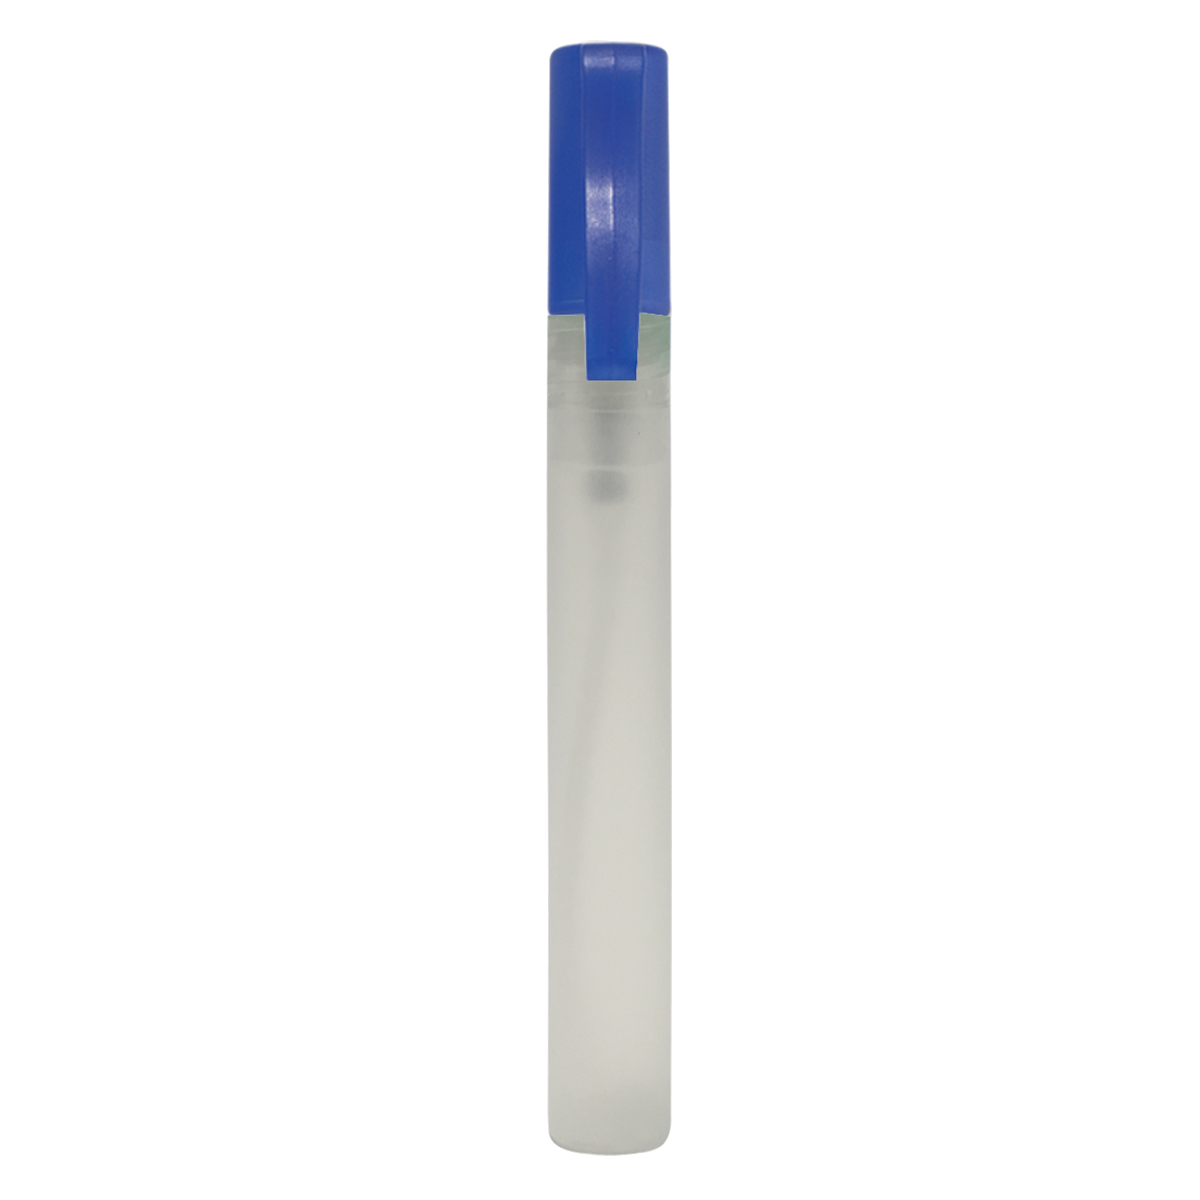 Blue Insect Repellent Pen Sprayer